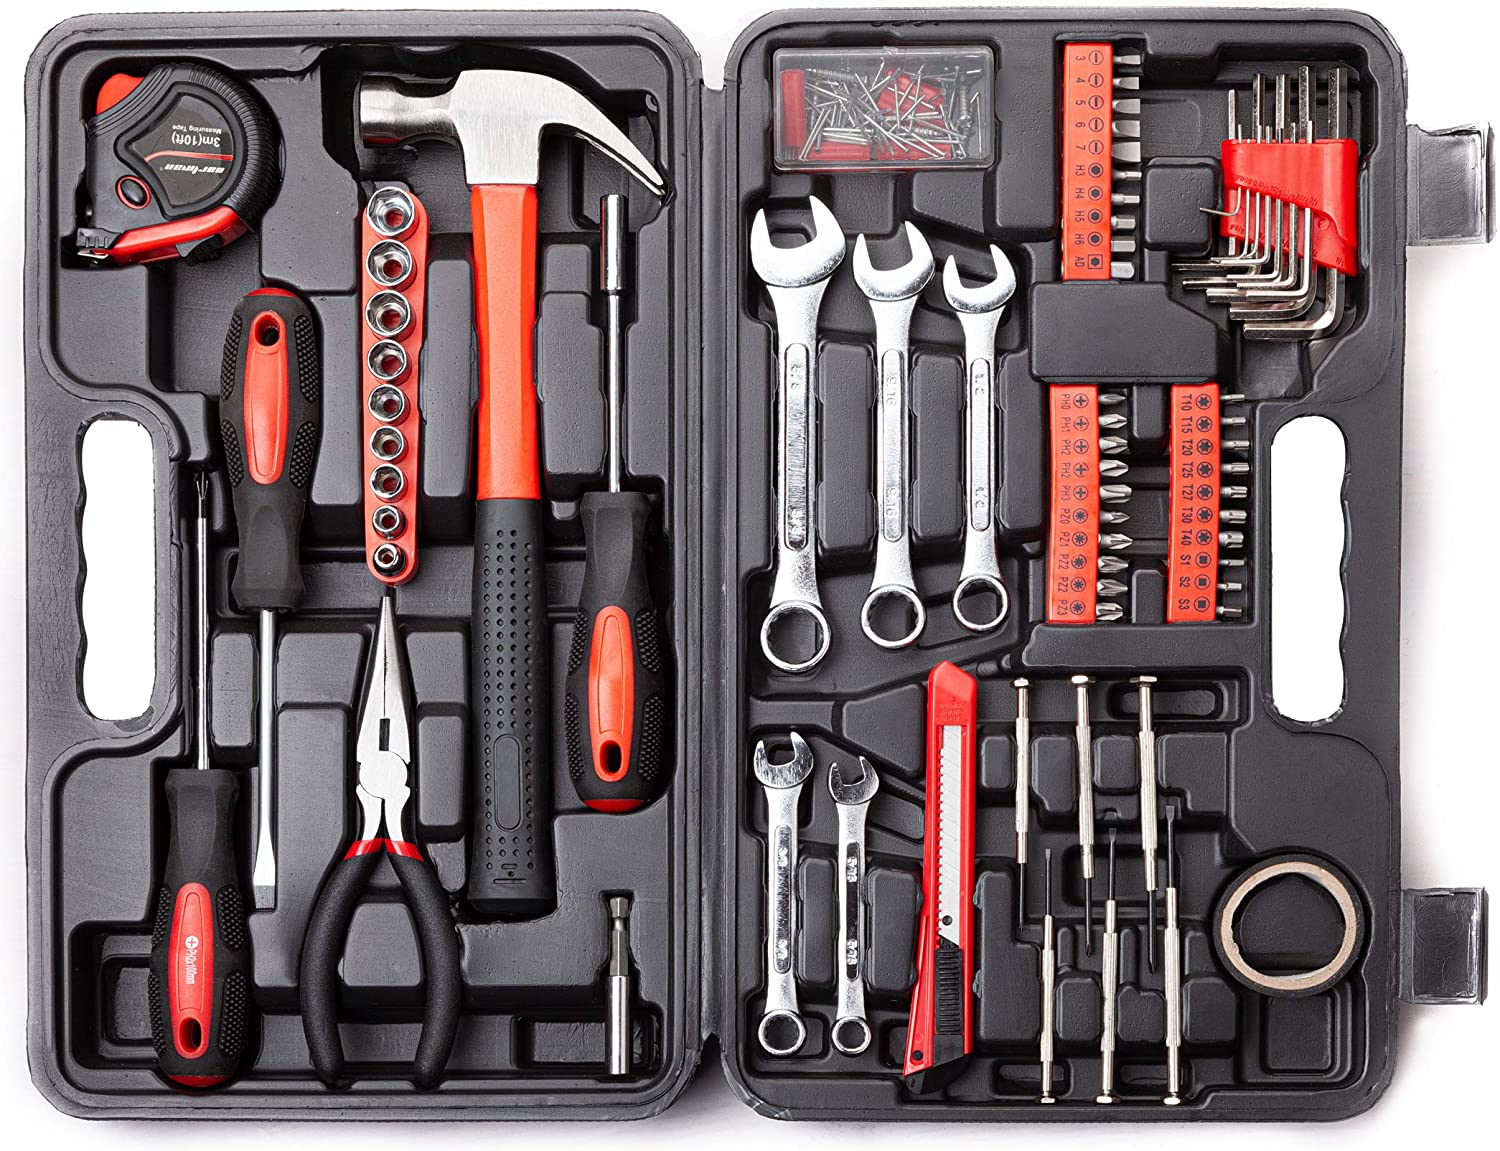 https://bigbigmart.com/wp-content/uploads/2022/07/148Piece-Tool-Set-General-Household-Hand-Tool-Kit-with-Plastic-Toolbox-Storage-Case-Socket-and-Socket-Wrench-Sets-CM-TK-21.jpg